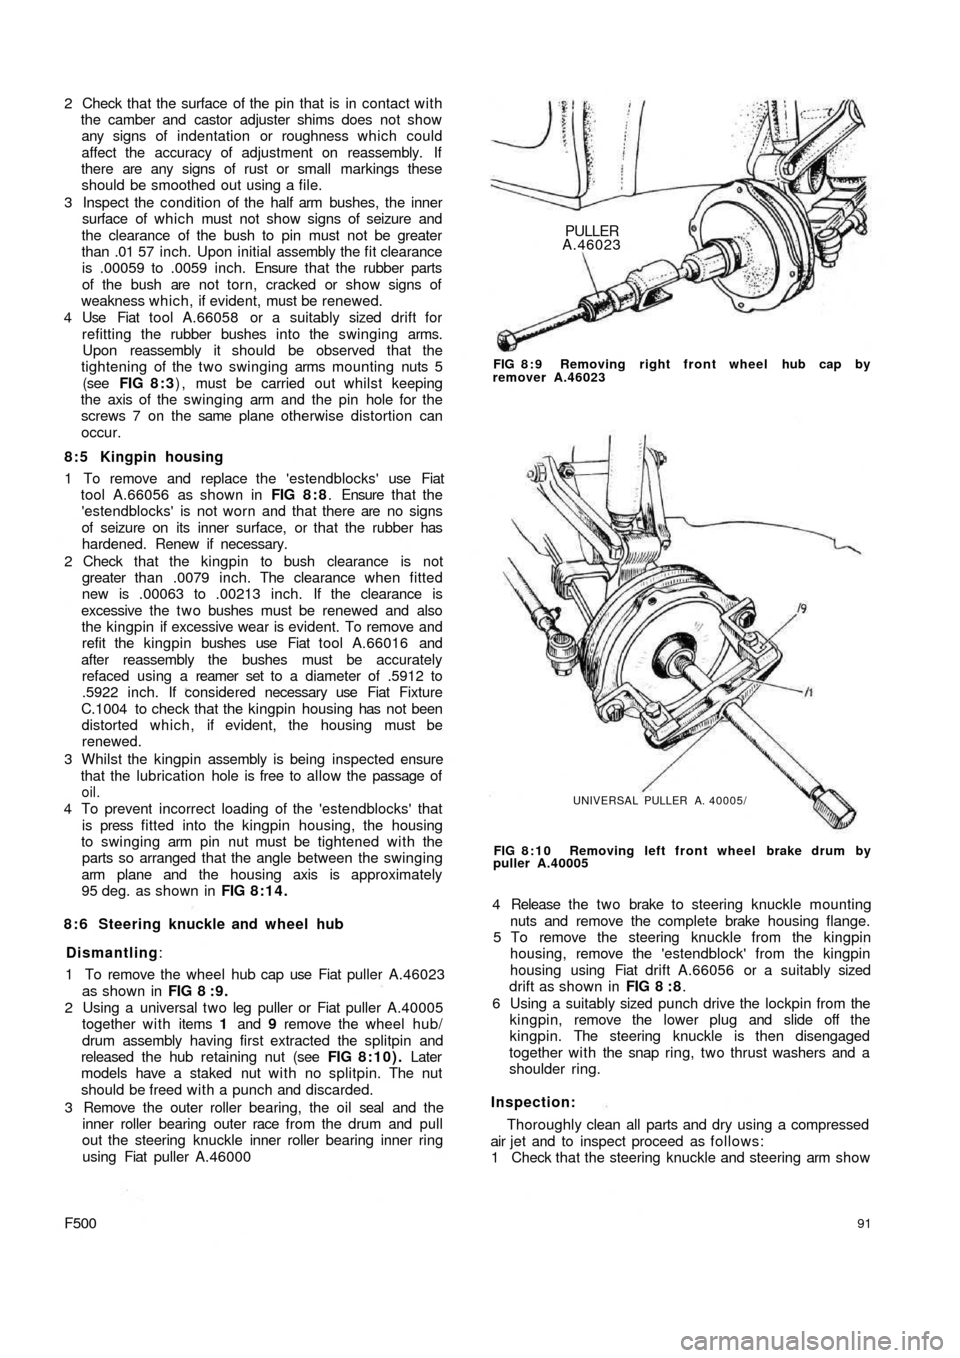 FIAT 500 1966 1.G Workshop Manual 2  Check that the surface of the pin that is in contact with
the camber and castor adjuster shims does not show
any signs of indentation or roughness which could
affect the  accuracy of adjustment on 